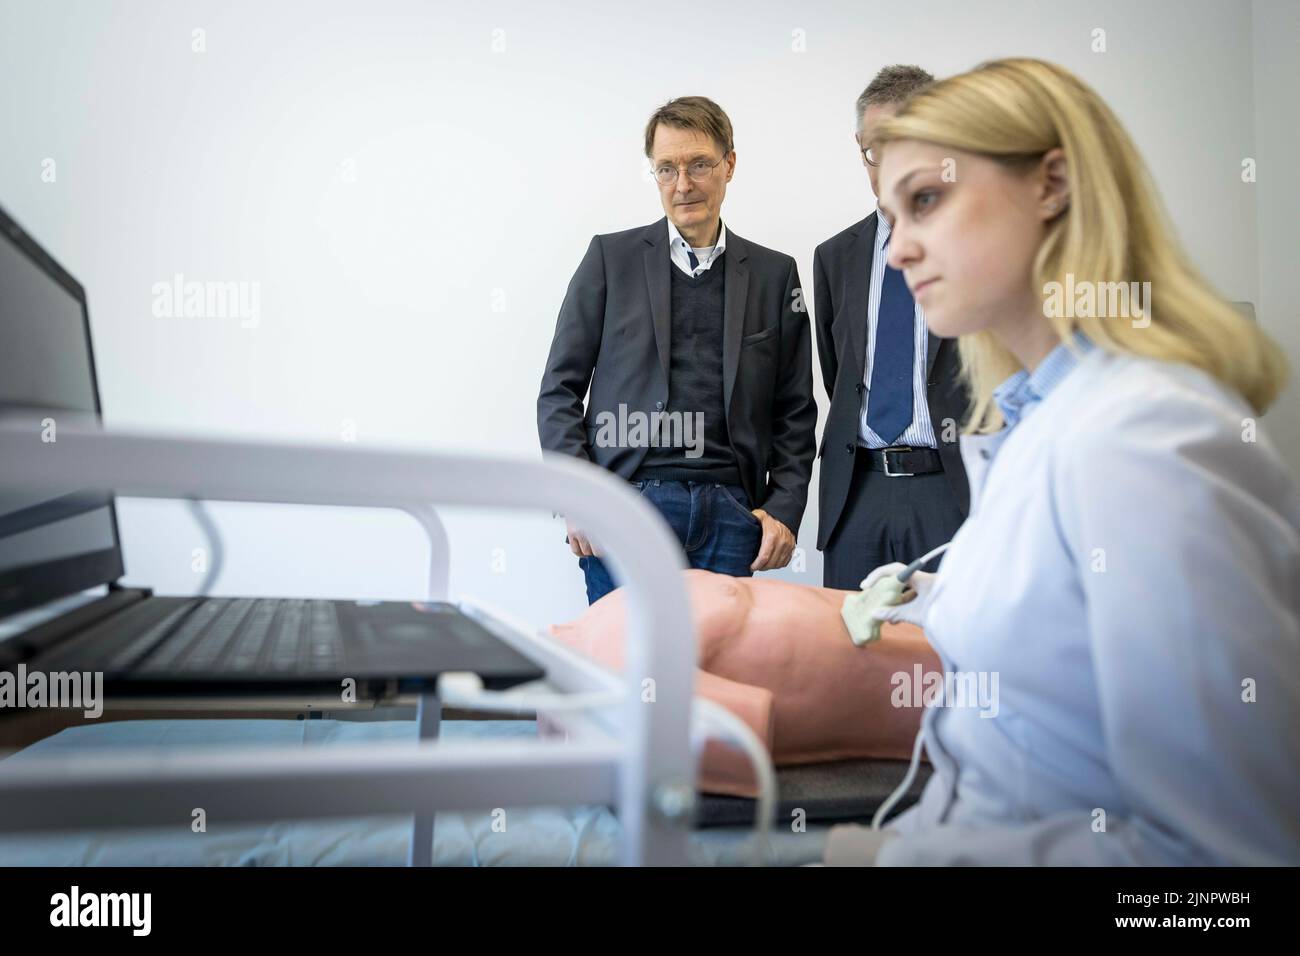 Lviv, Ukraine. 10th June, 2022. Karl Lauterbach (SPD), Federal Minister of Health, visits the training simulation center of the Lviv National Medical University na Danylo in the Ukrainian city of Lviv (Lemberg). Here doctors are trained on dummies and with the help of computer simulations, Credit: dpa/Alamy Live News Stock Photo